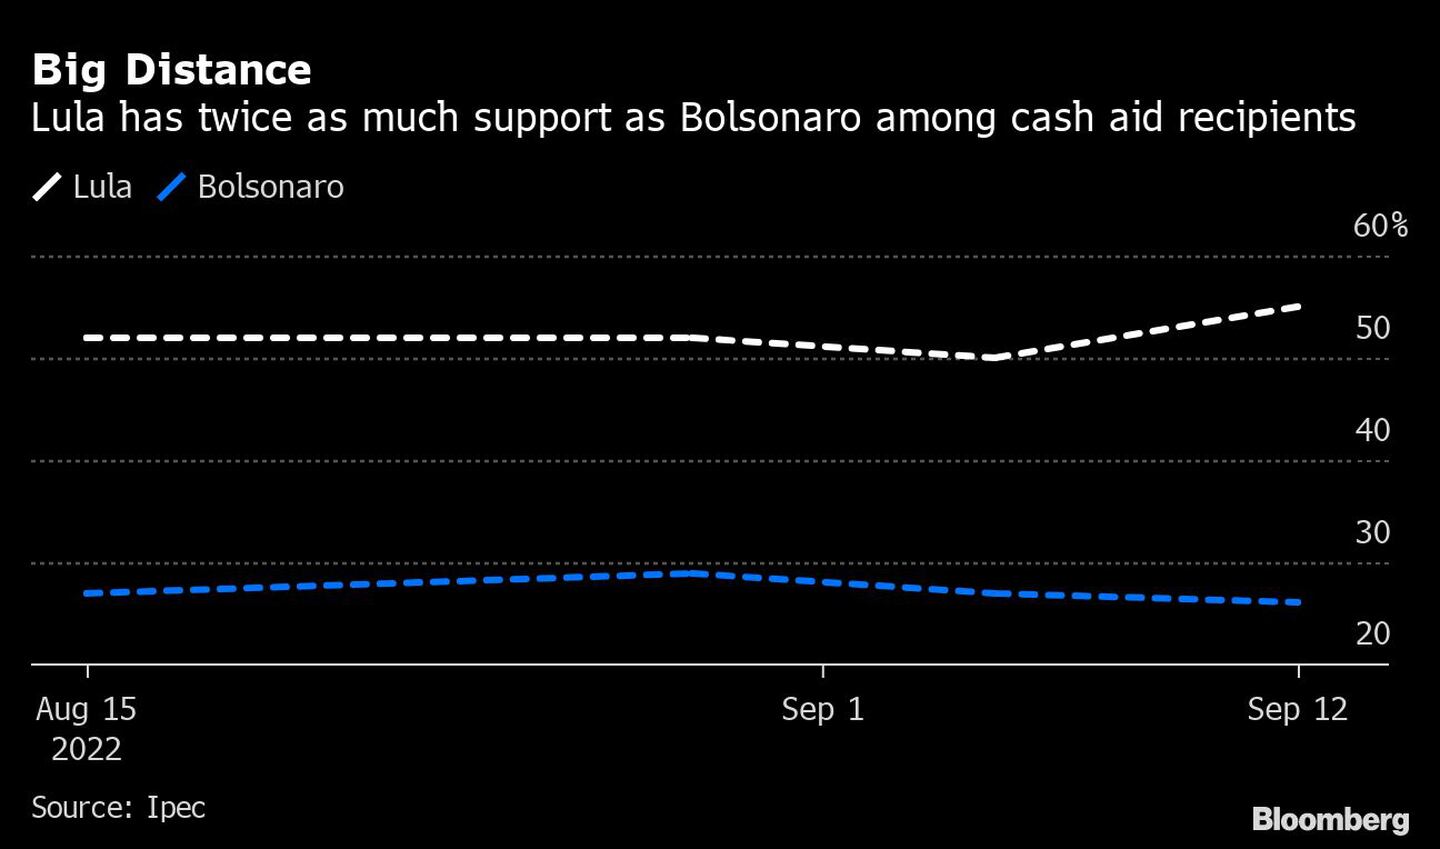 Big Distance | Lula has twice as much support as Bolsonaro among cash aid recipientsdfd